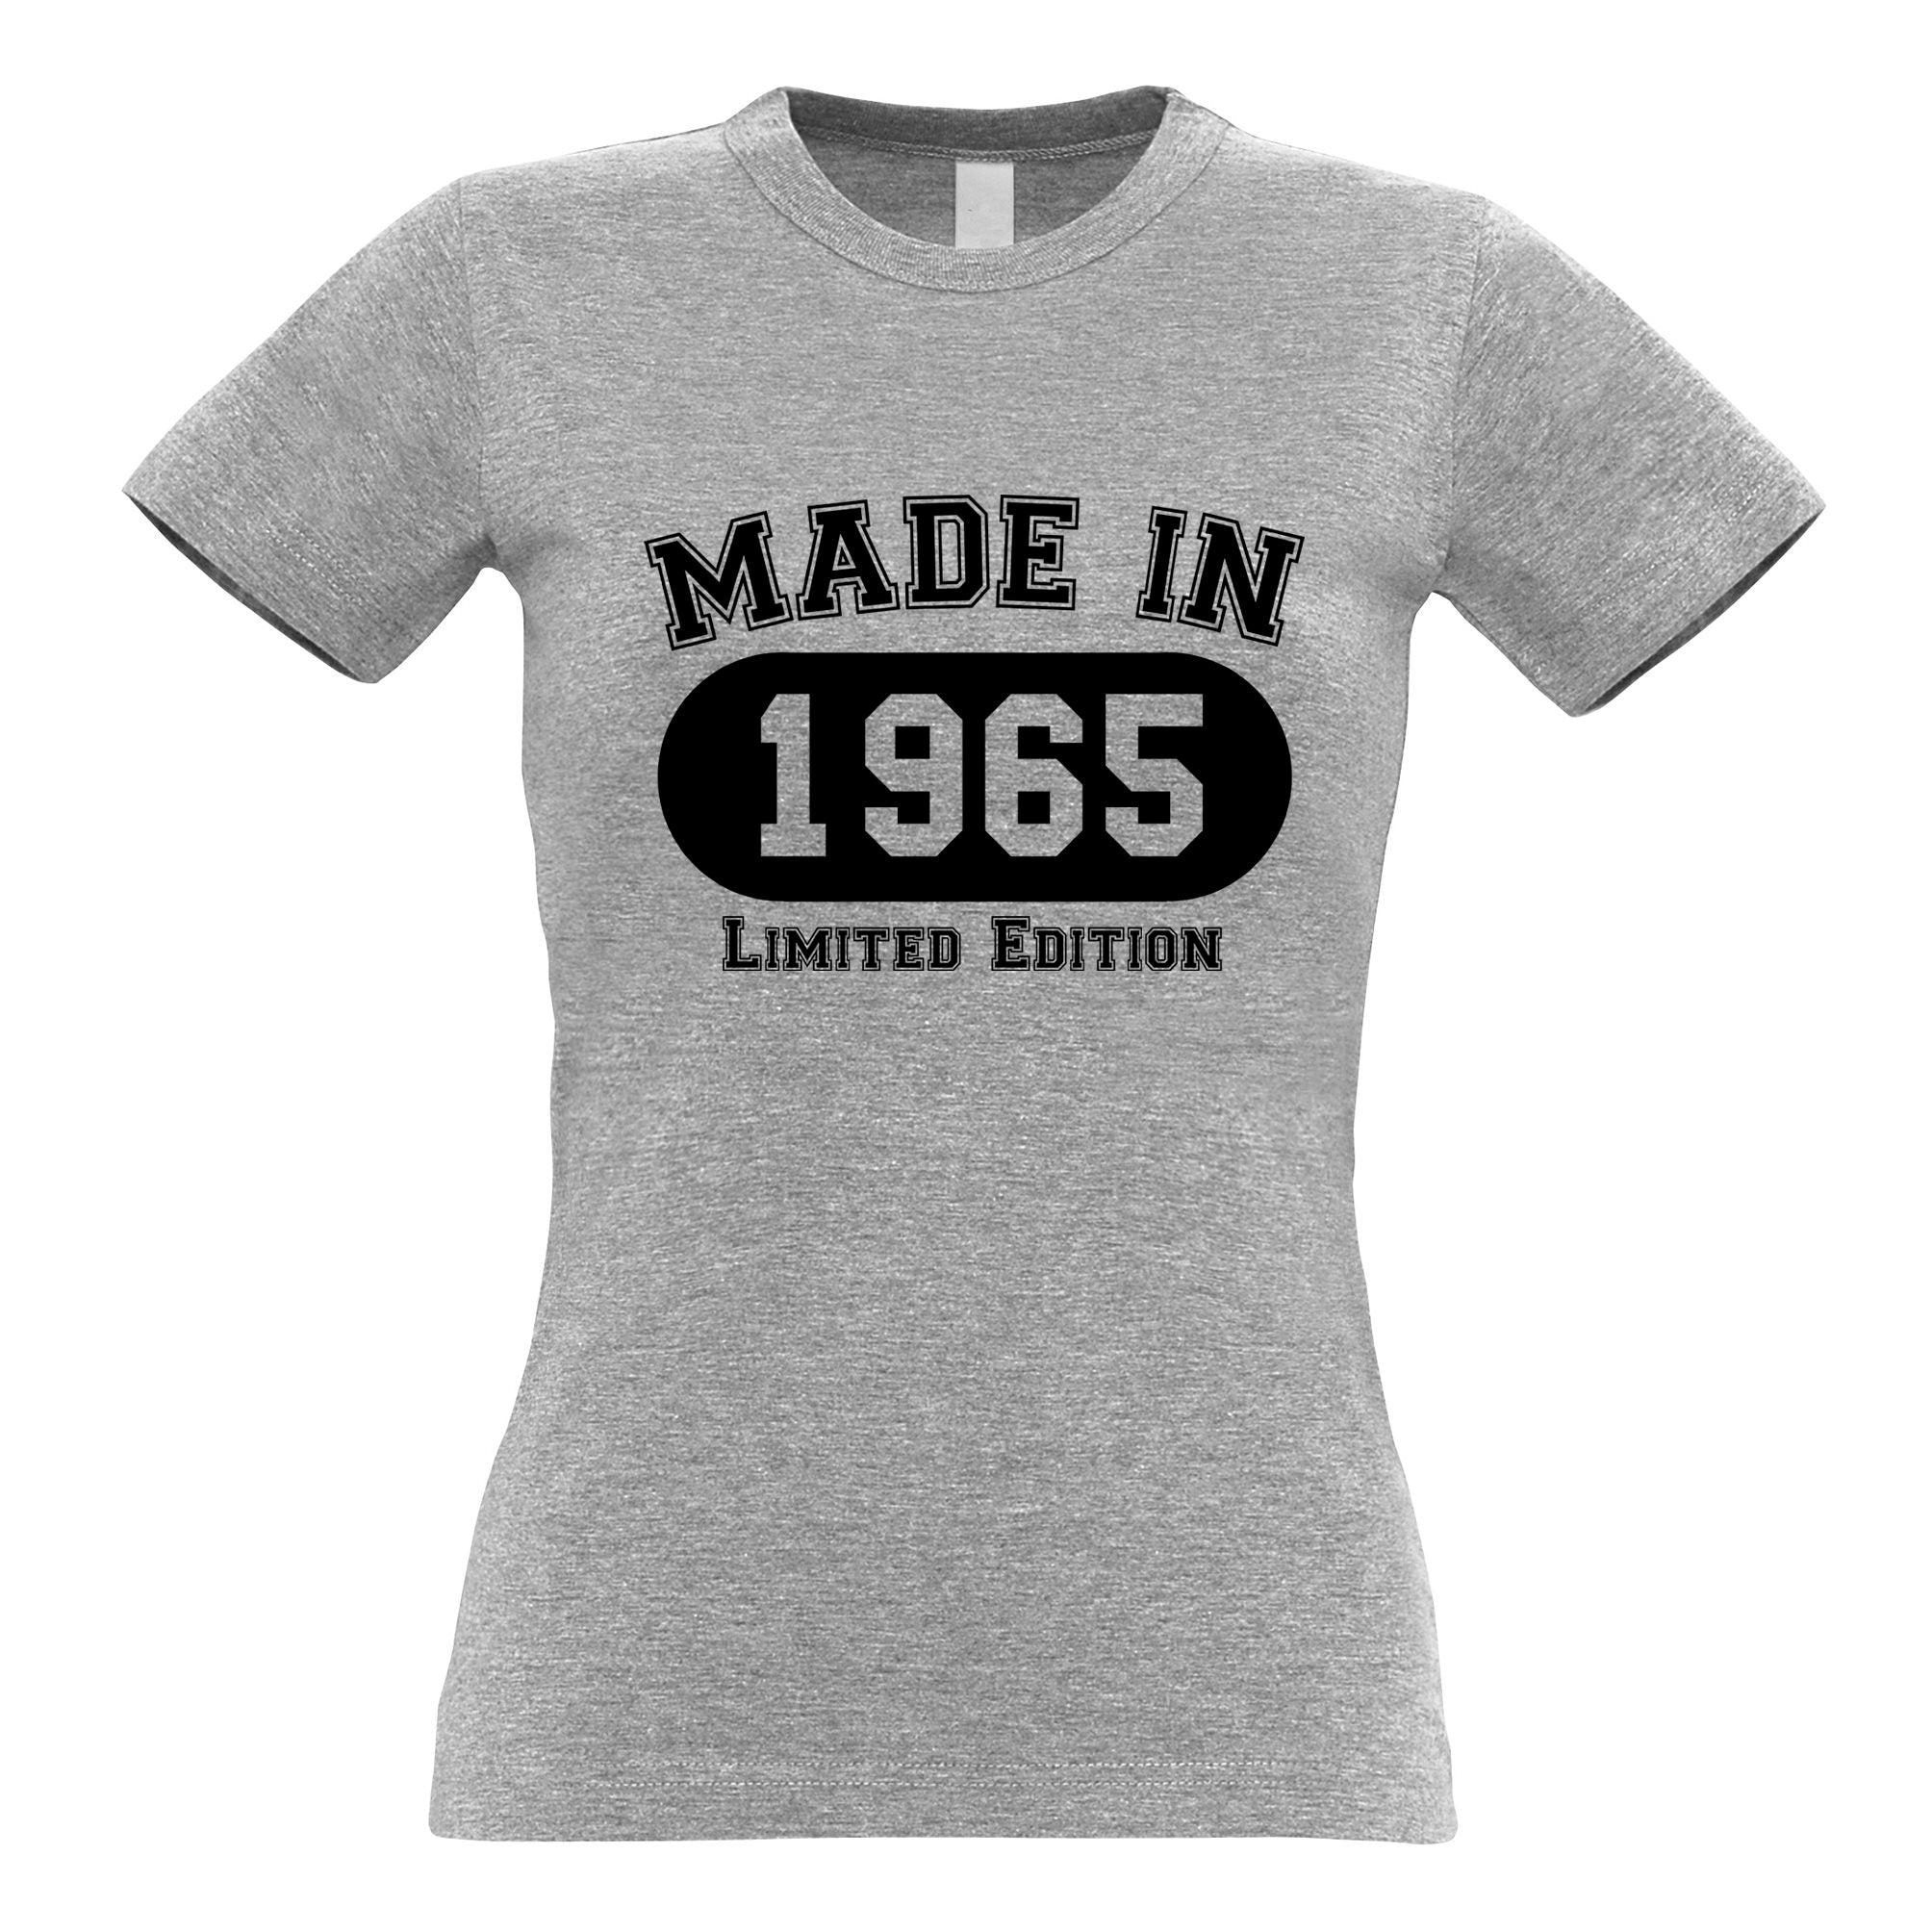 Birthday Womens T Shirt Made in 1965 Limited Edition